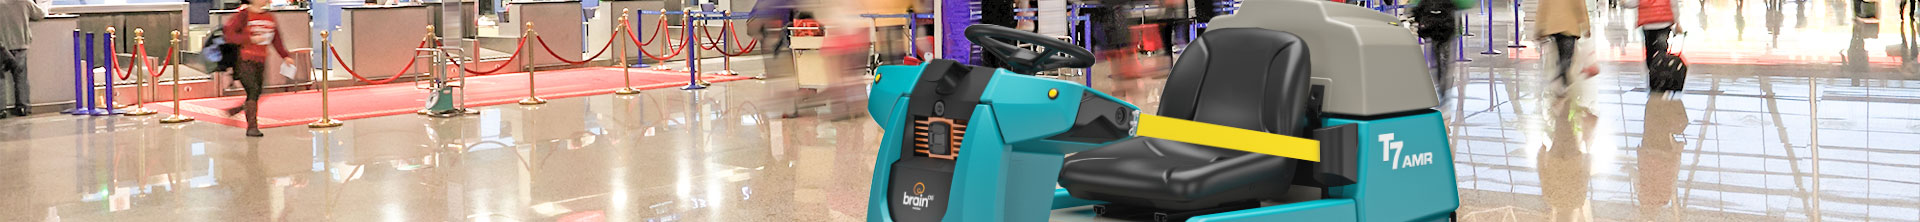 Tennant T7AMR Robotic Floor Scrubber cleaning airport